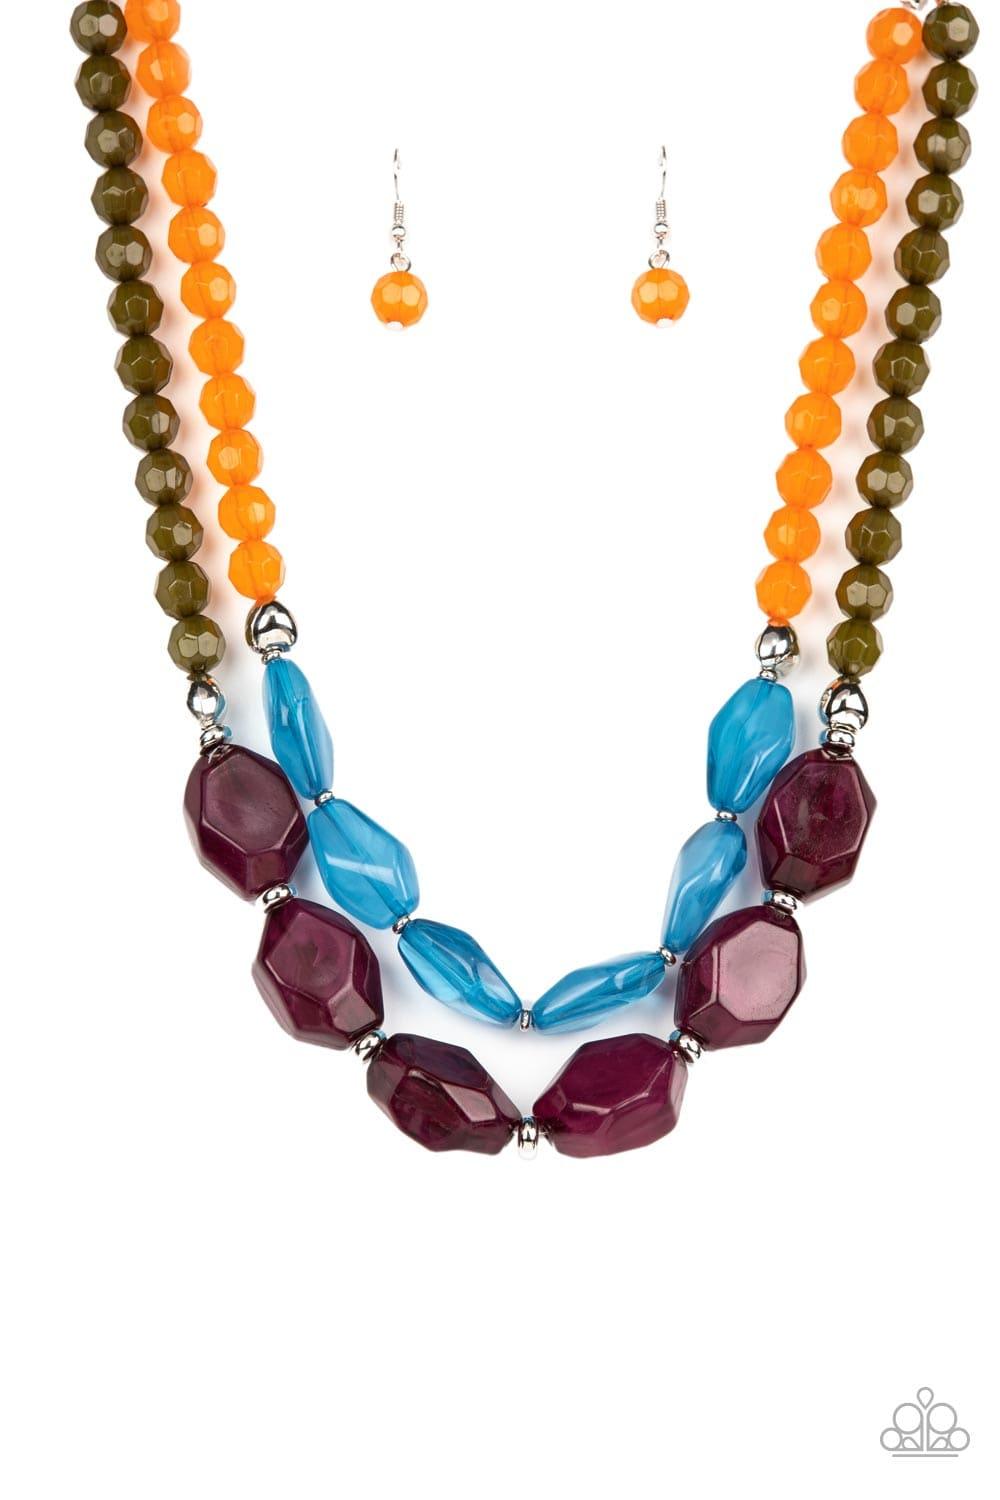 Paparazzi Accessories - Tropical Trove - Purple Necklace - Bling by JessieK